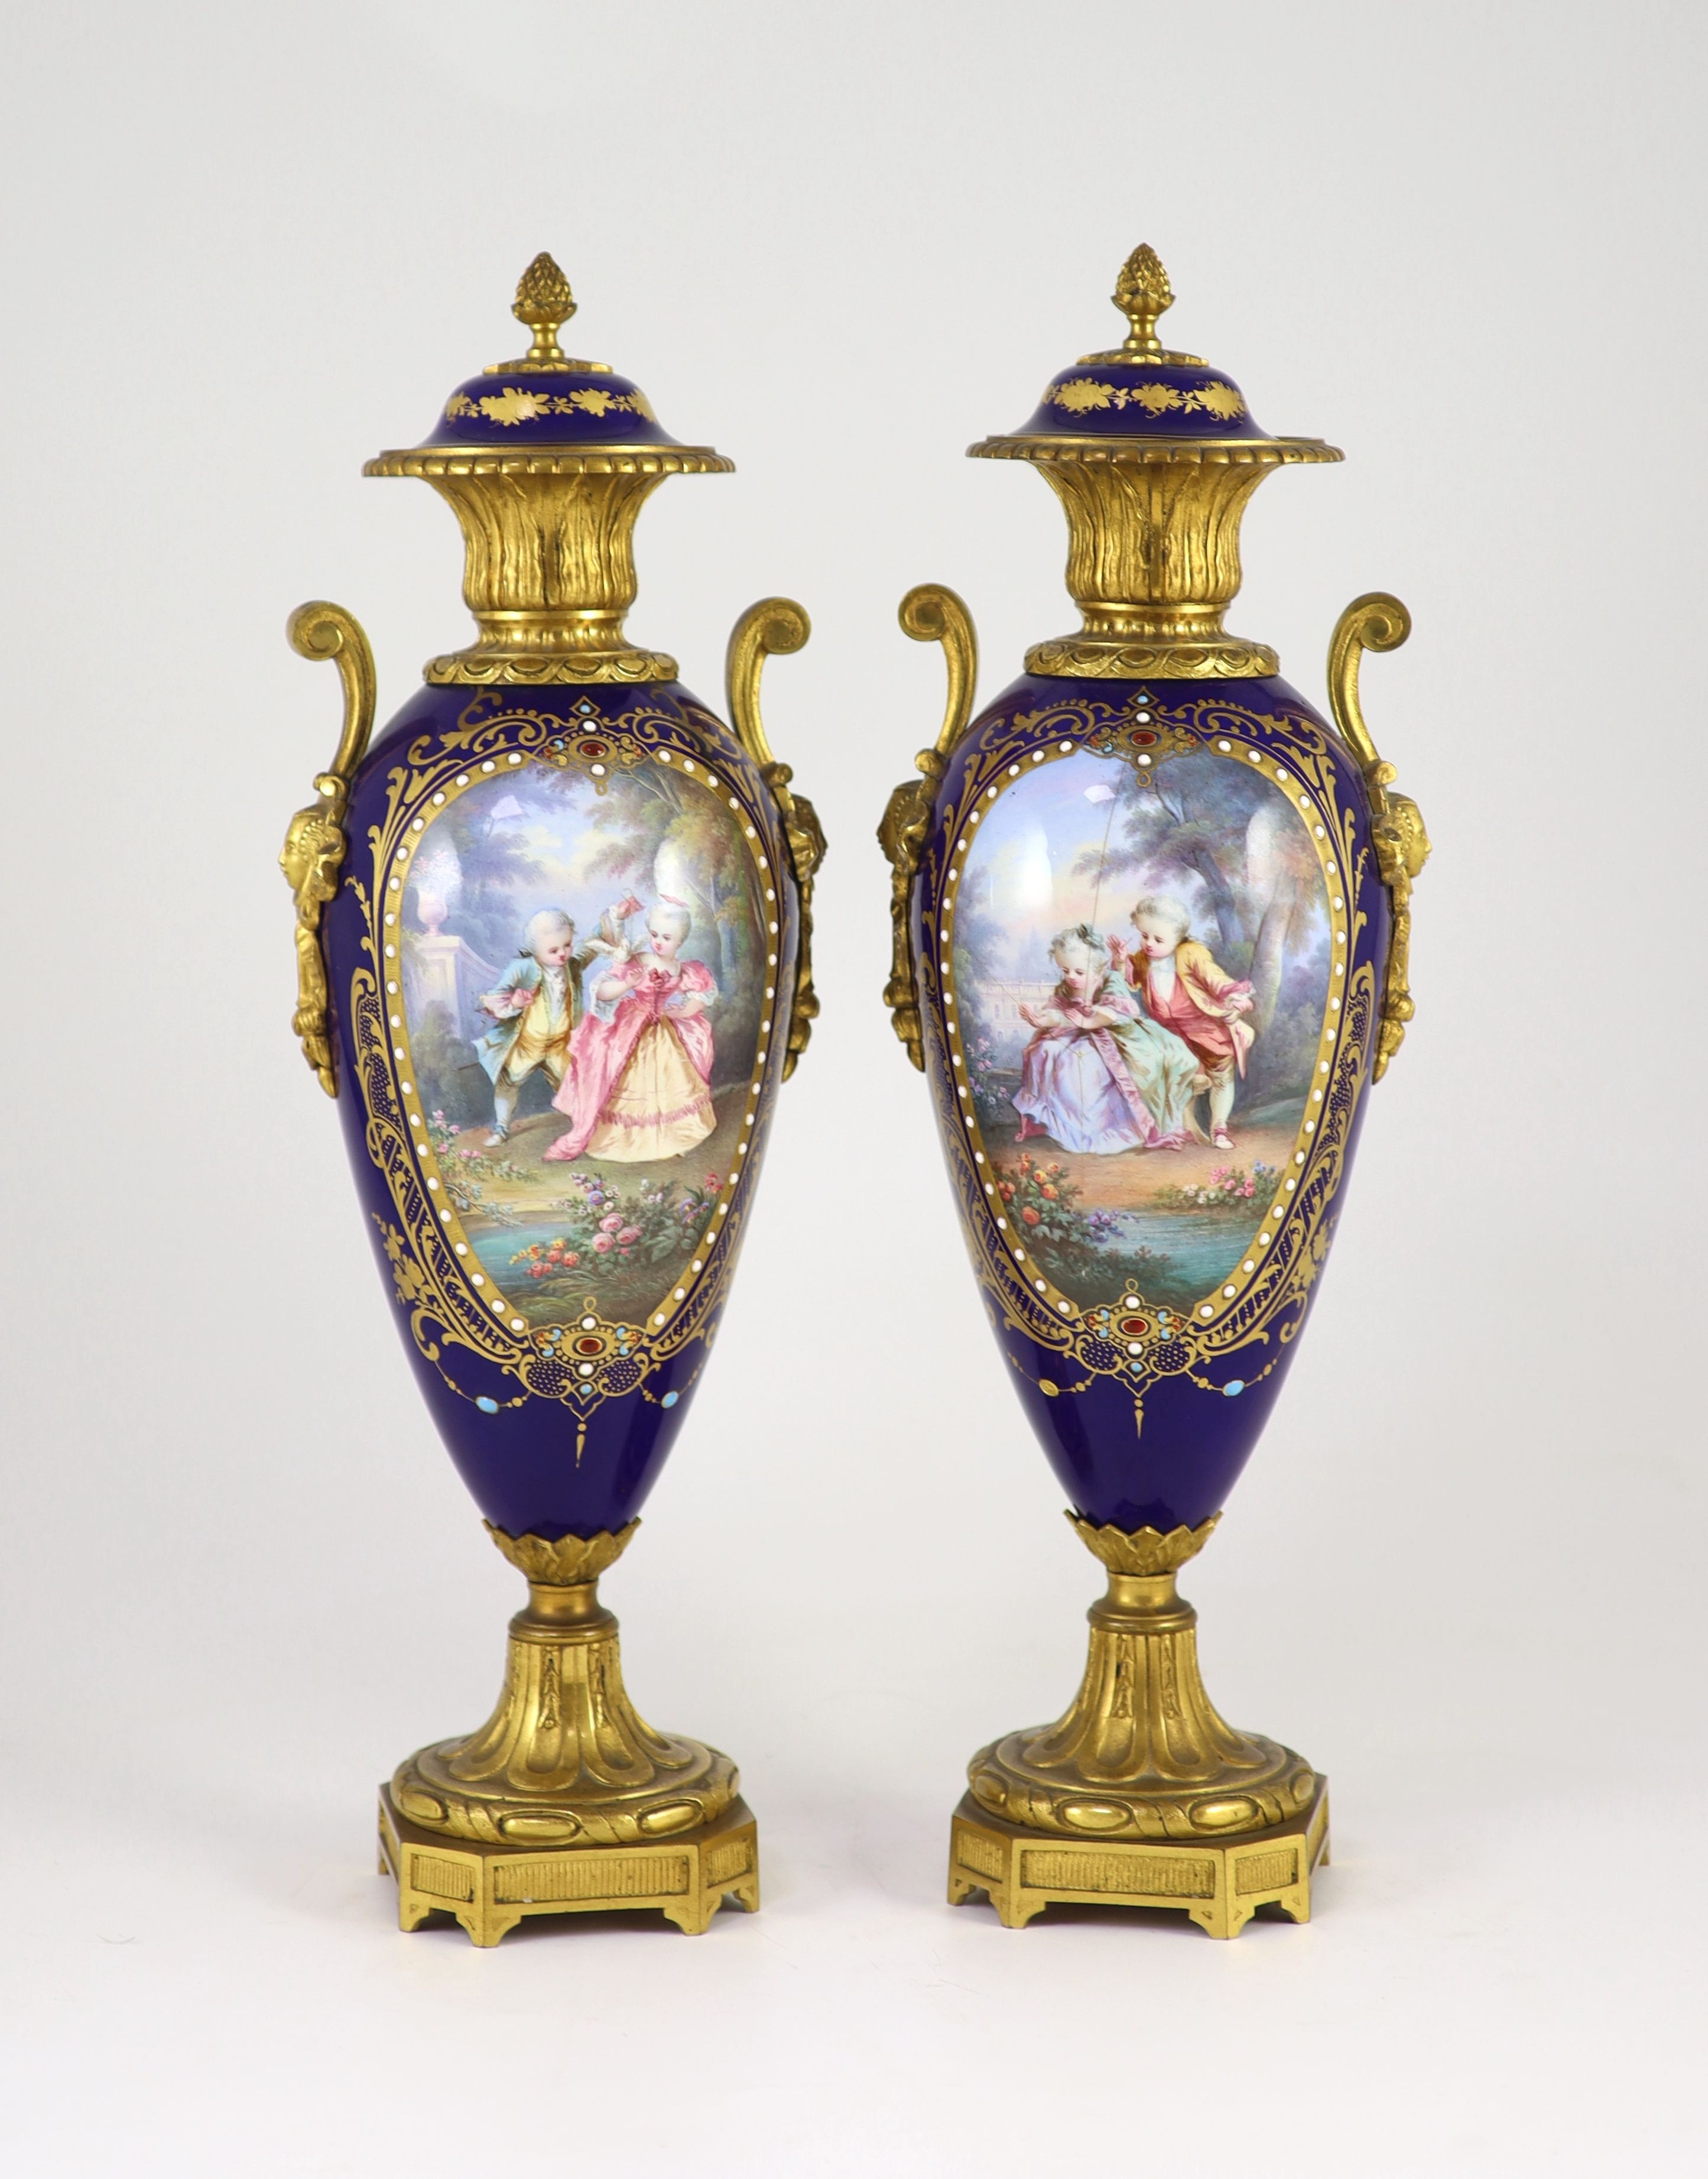 A pair of Sevres style ‘jewelled’ porcelain and ormolu mounted vases, c.1900,each of oviform, - Image 2 of 4